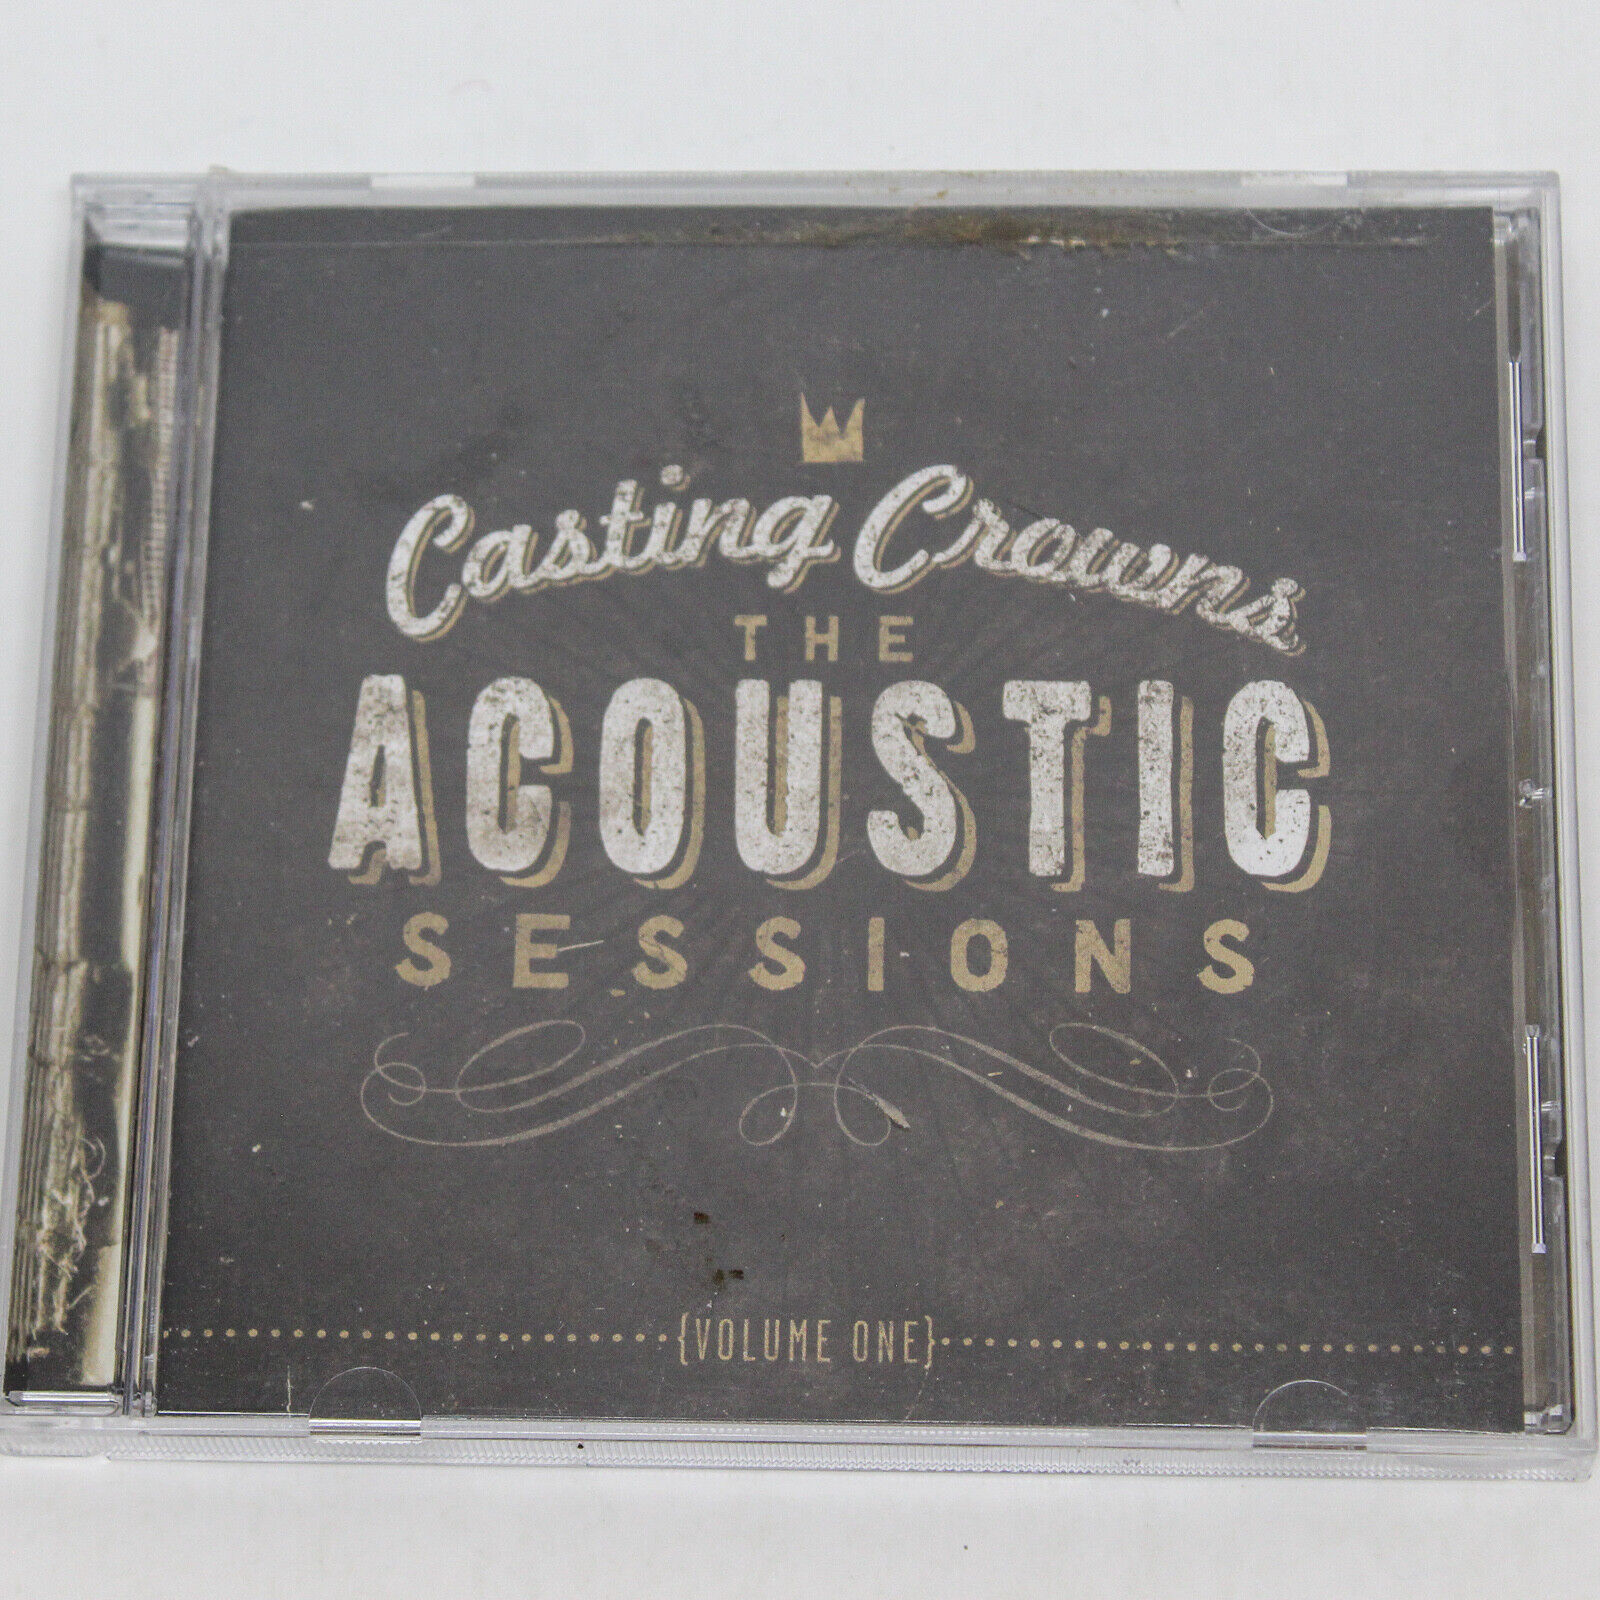 Casting Crowns The Acoustic Sessions Volume One Audio Music CD 2013 Sony